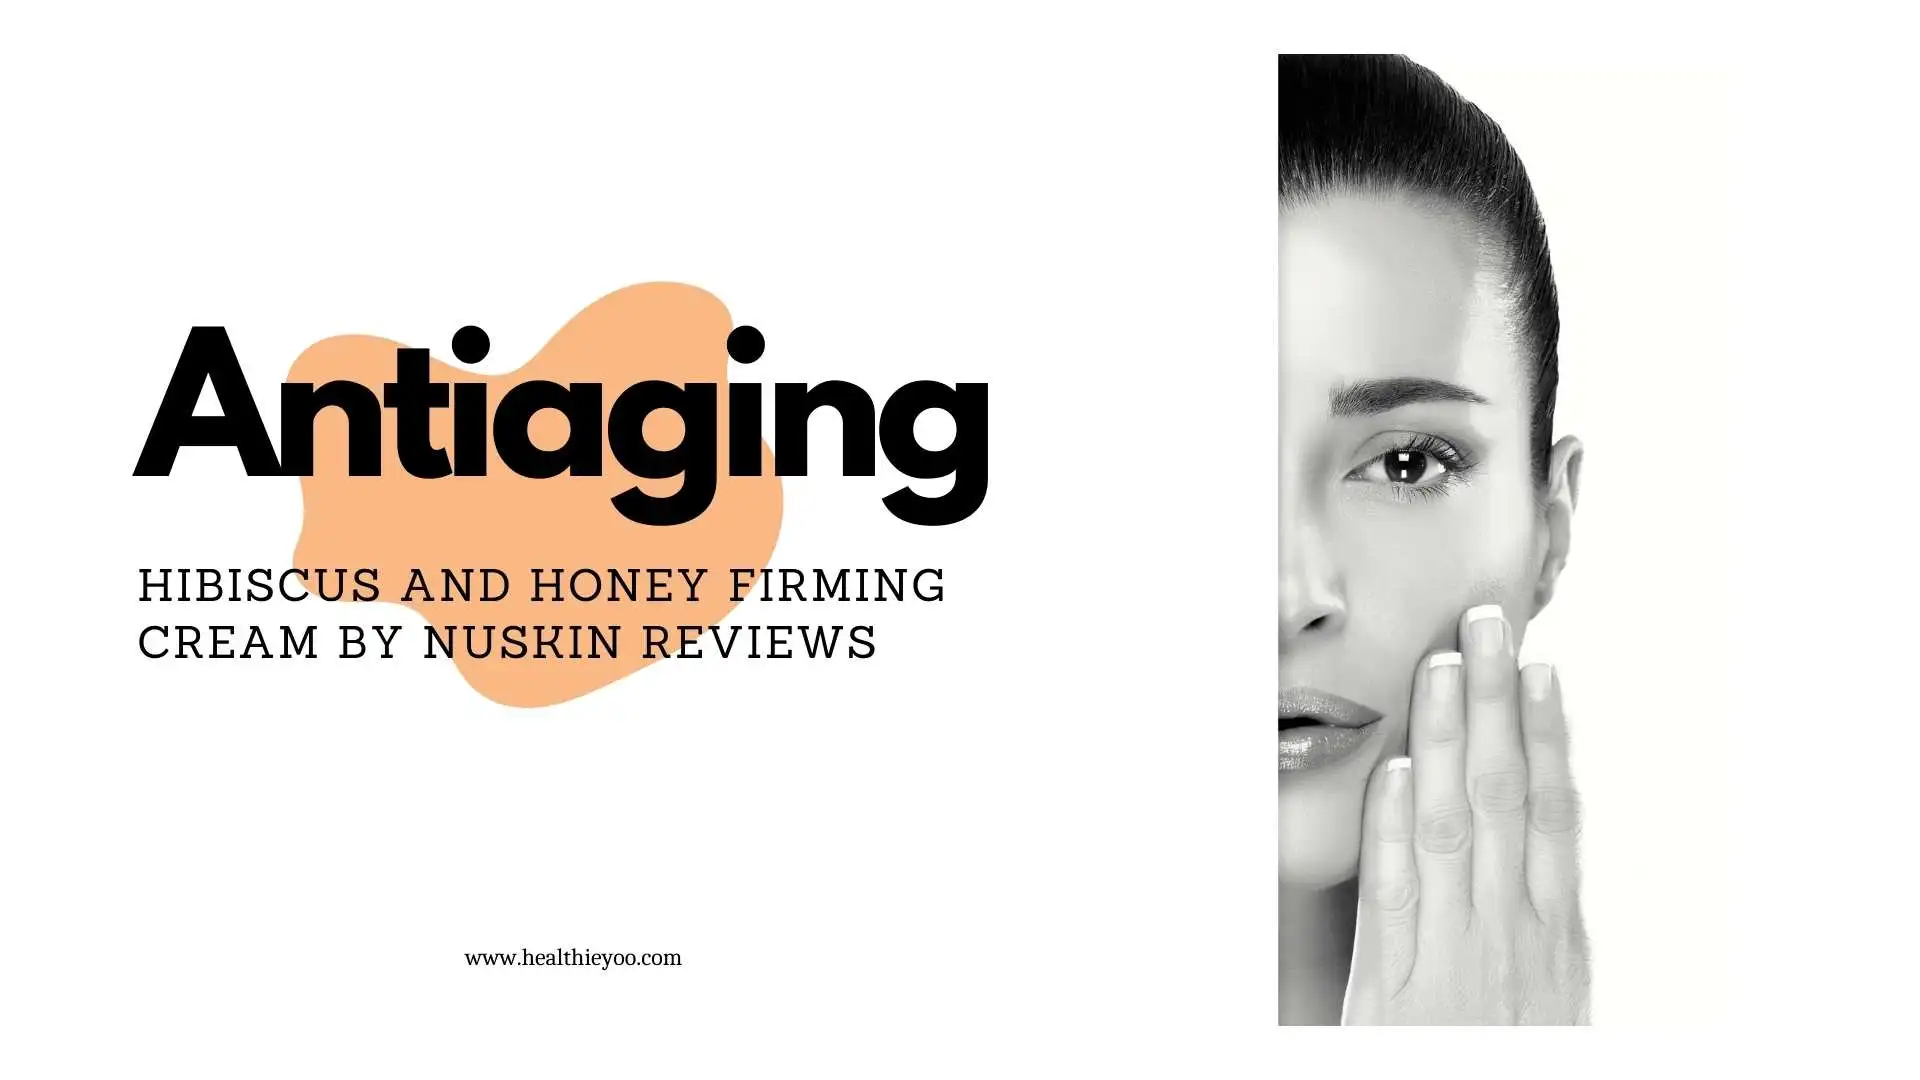 Hibiscus and Honey Firming Cream, Nuskin, Reviews, ageLOC dermatic effects, ingredients, side effects, antiaging